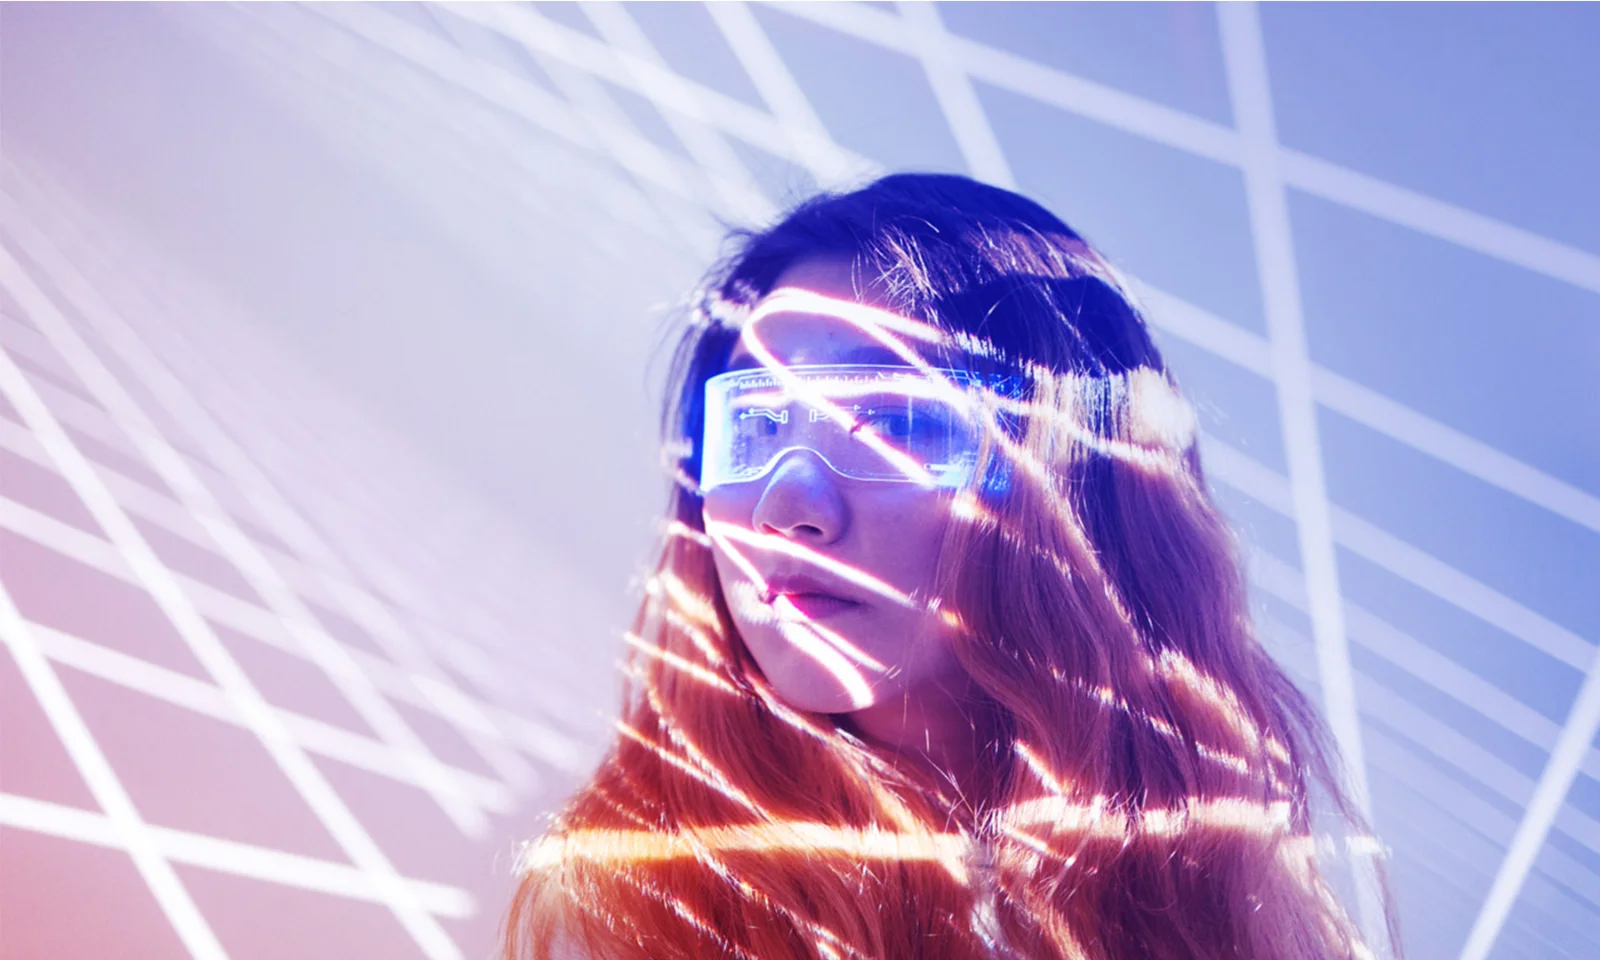 Explore the future of innovation at GFT with this striking teaser image featuring a woman in futuristic glasses and dynamic light patterns. This visual symbolizes the cutting-edge advancements and forward-thinking approach at GFT&#039;s Innovation Lab.